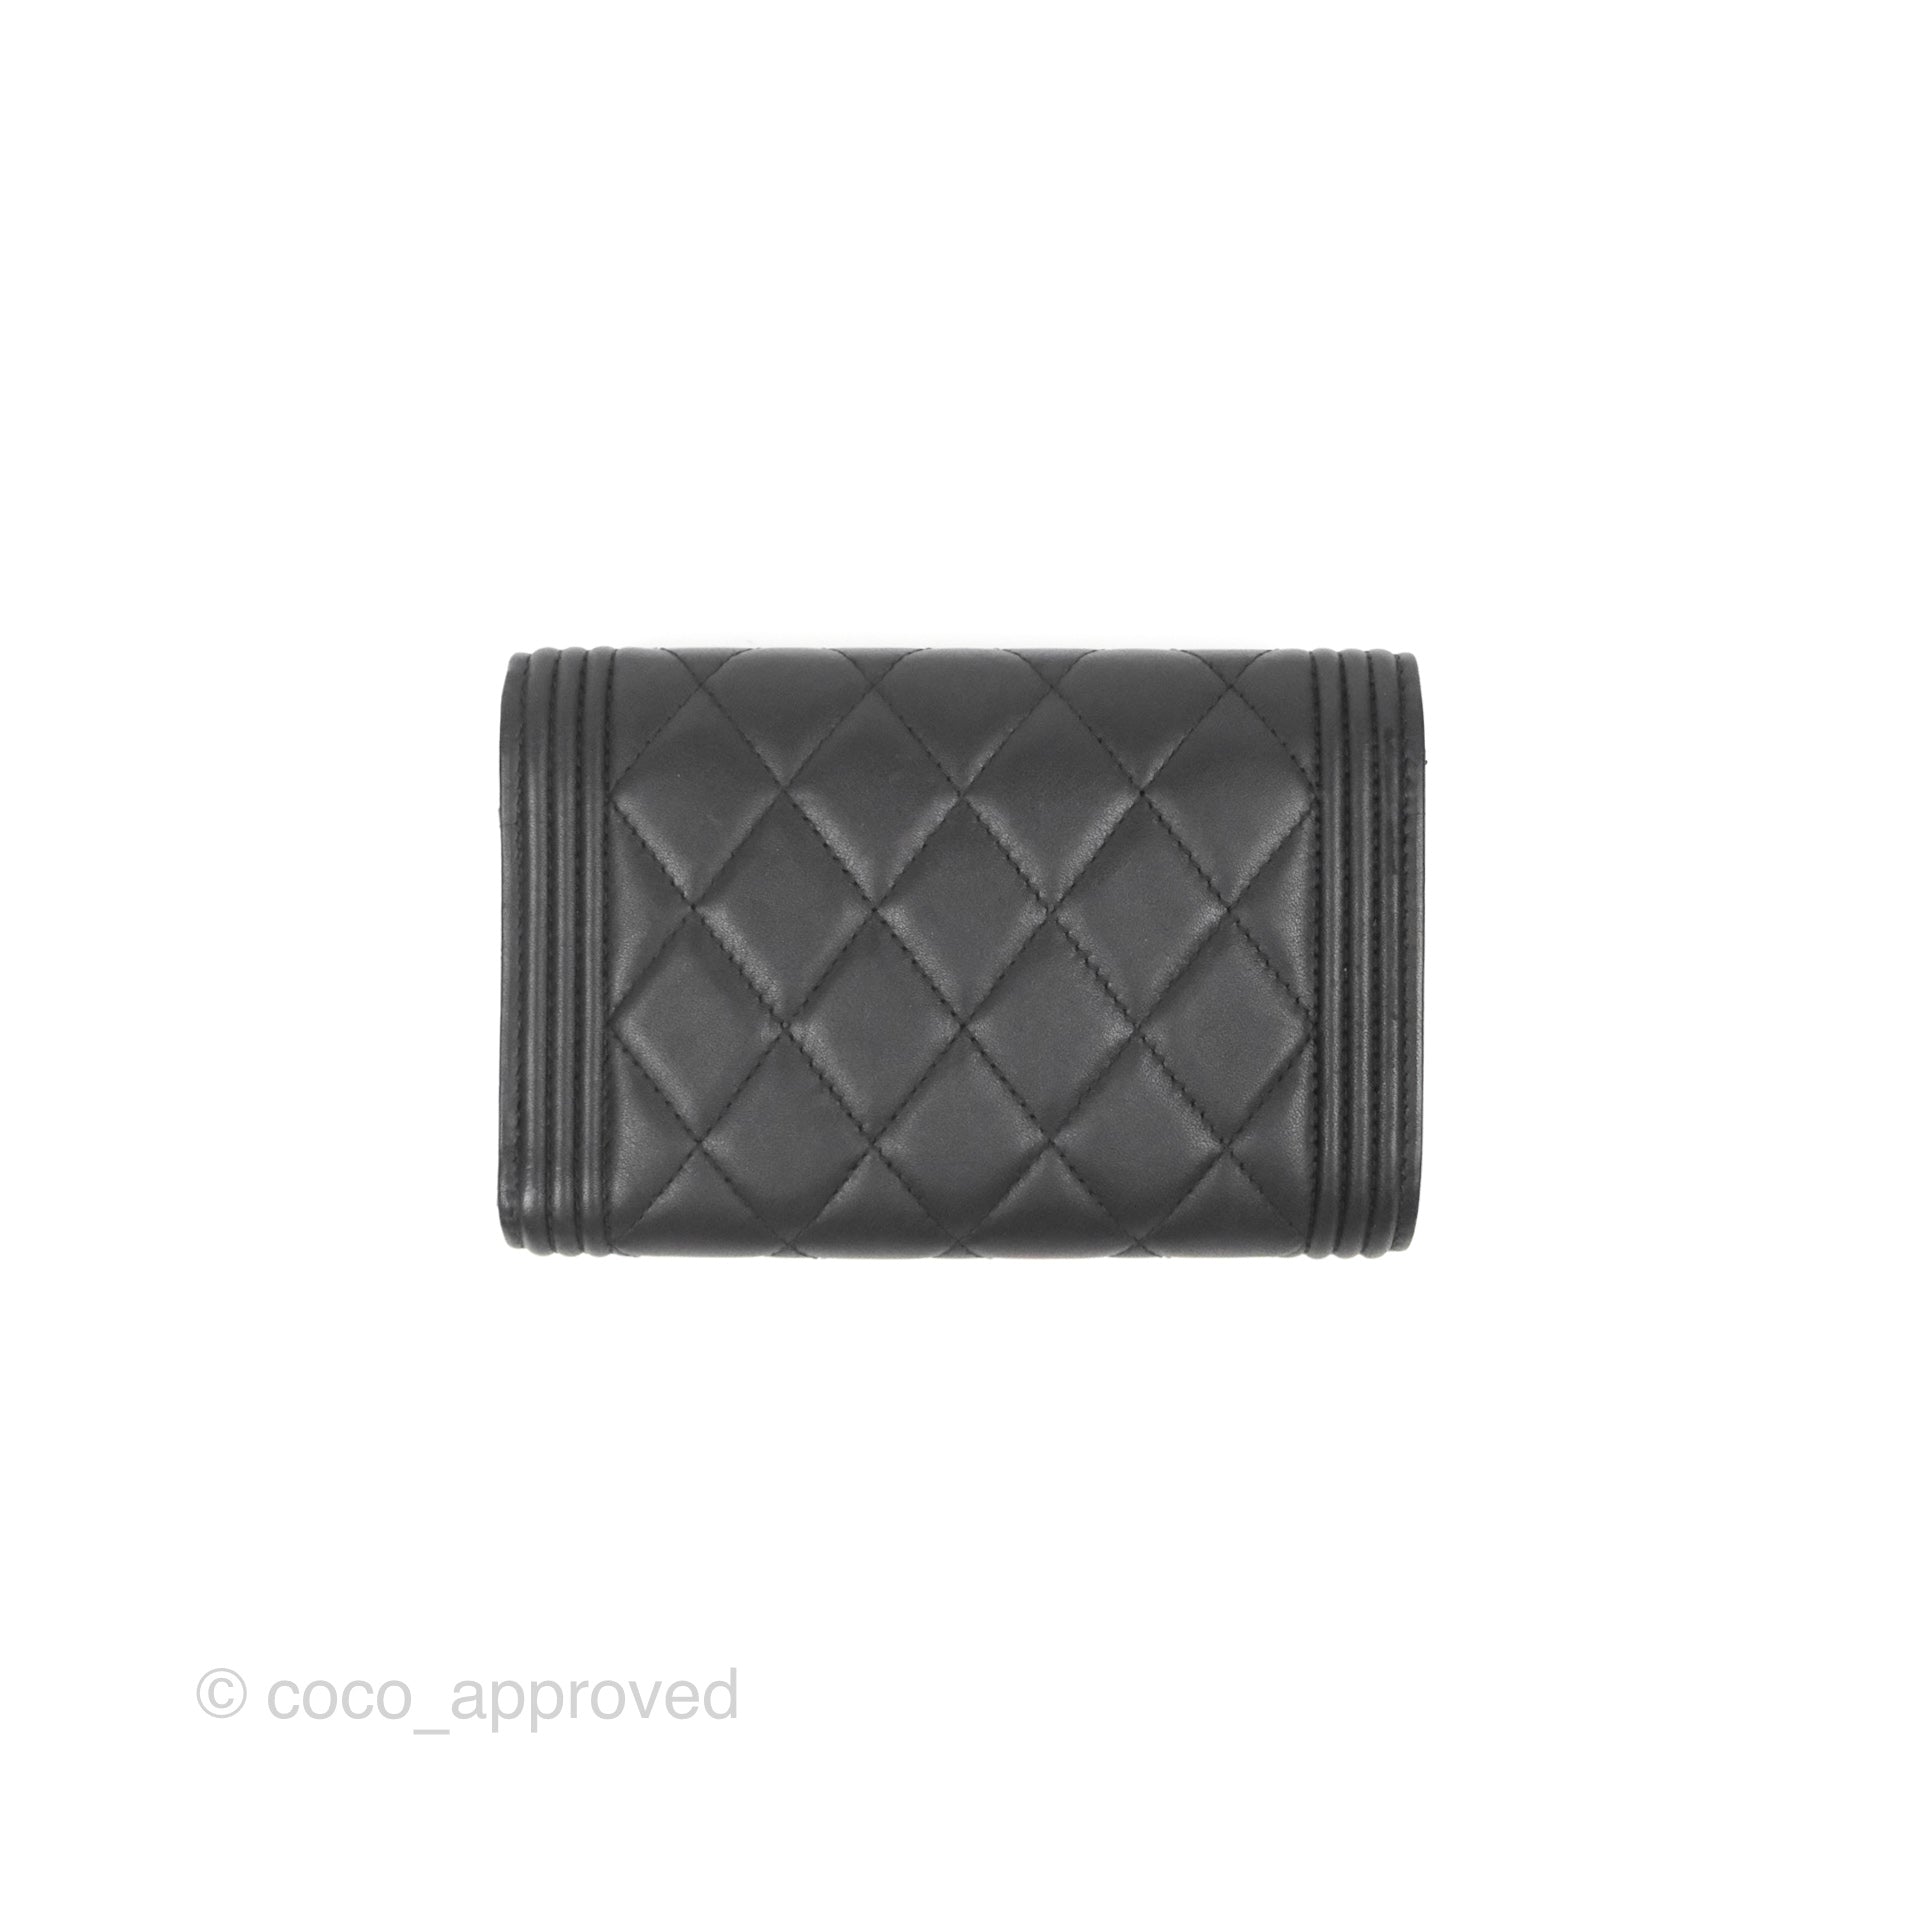 CHANEL Boy Chanel Small Flap Wallet Three-fold Compact Wallet A84432